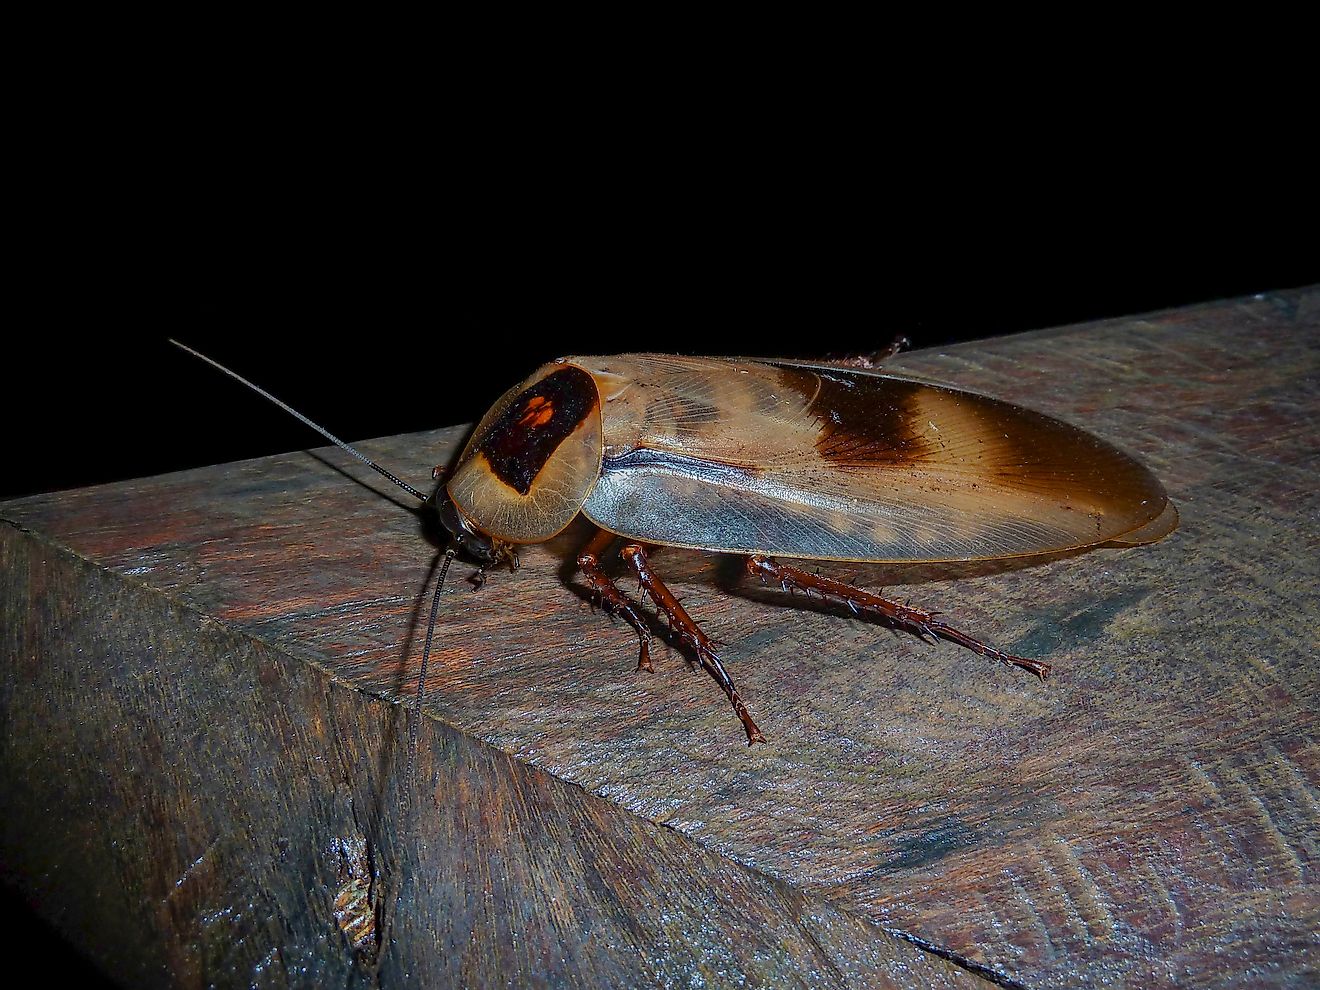 A large cockroach on wooden plank at night time. Image credit: Kakteen/Shutterstock.com